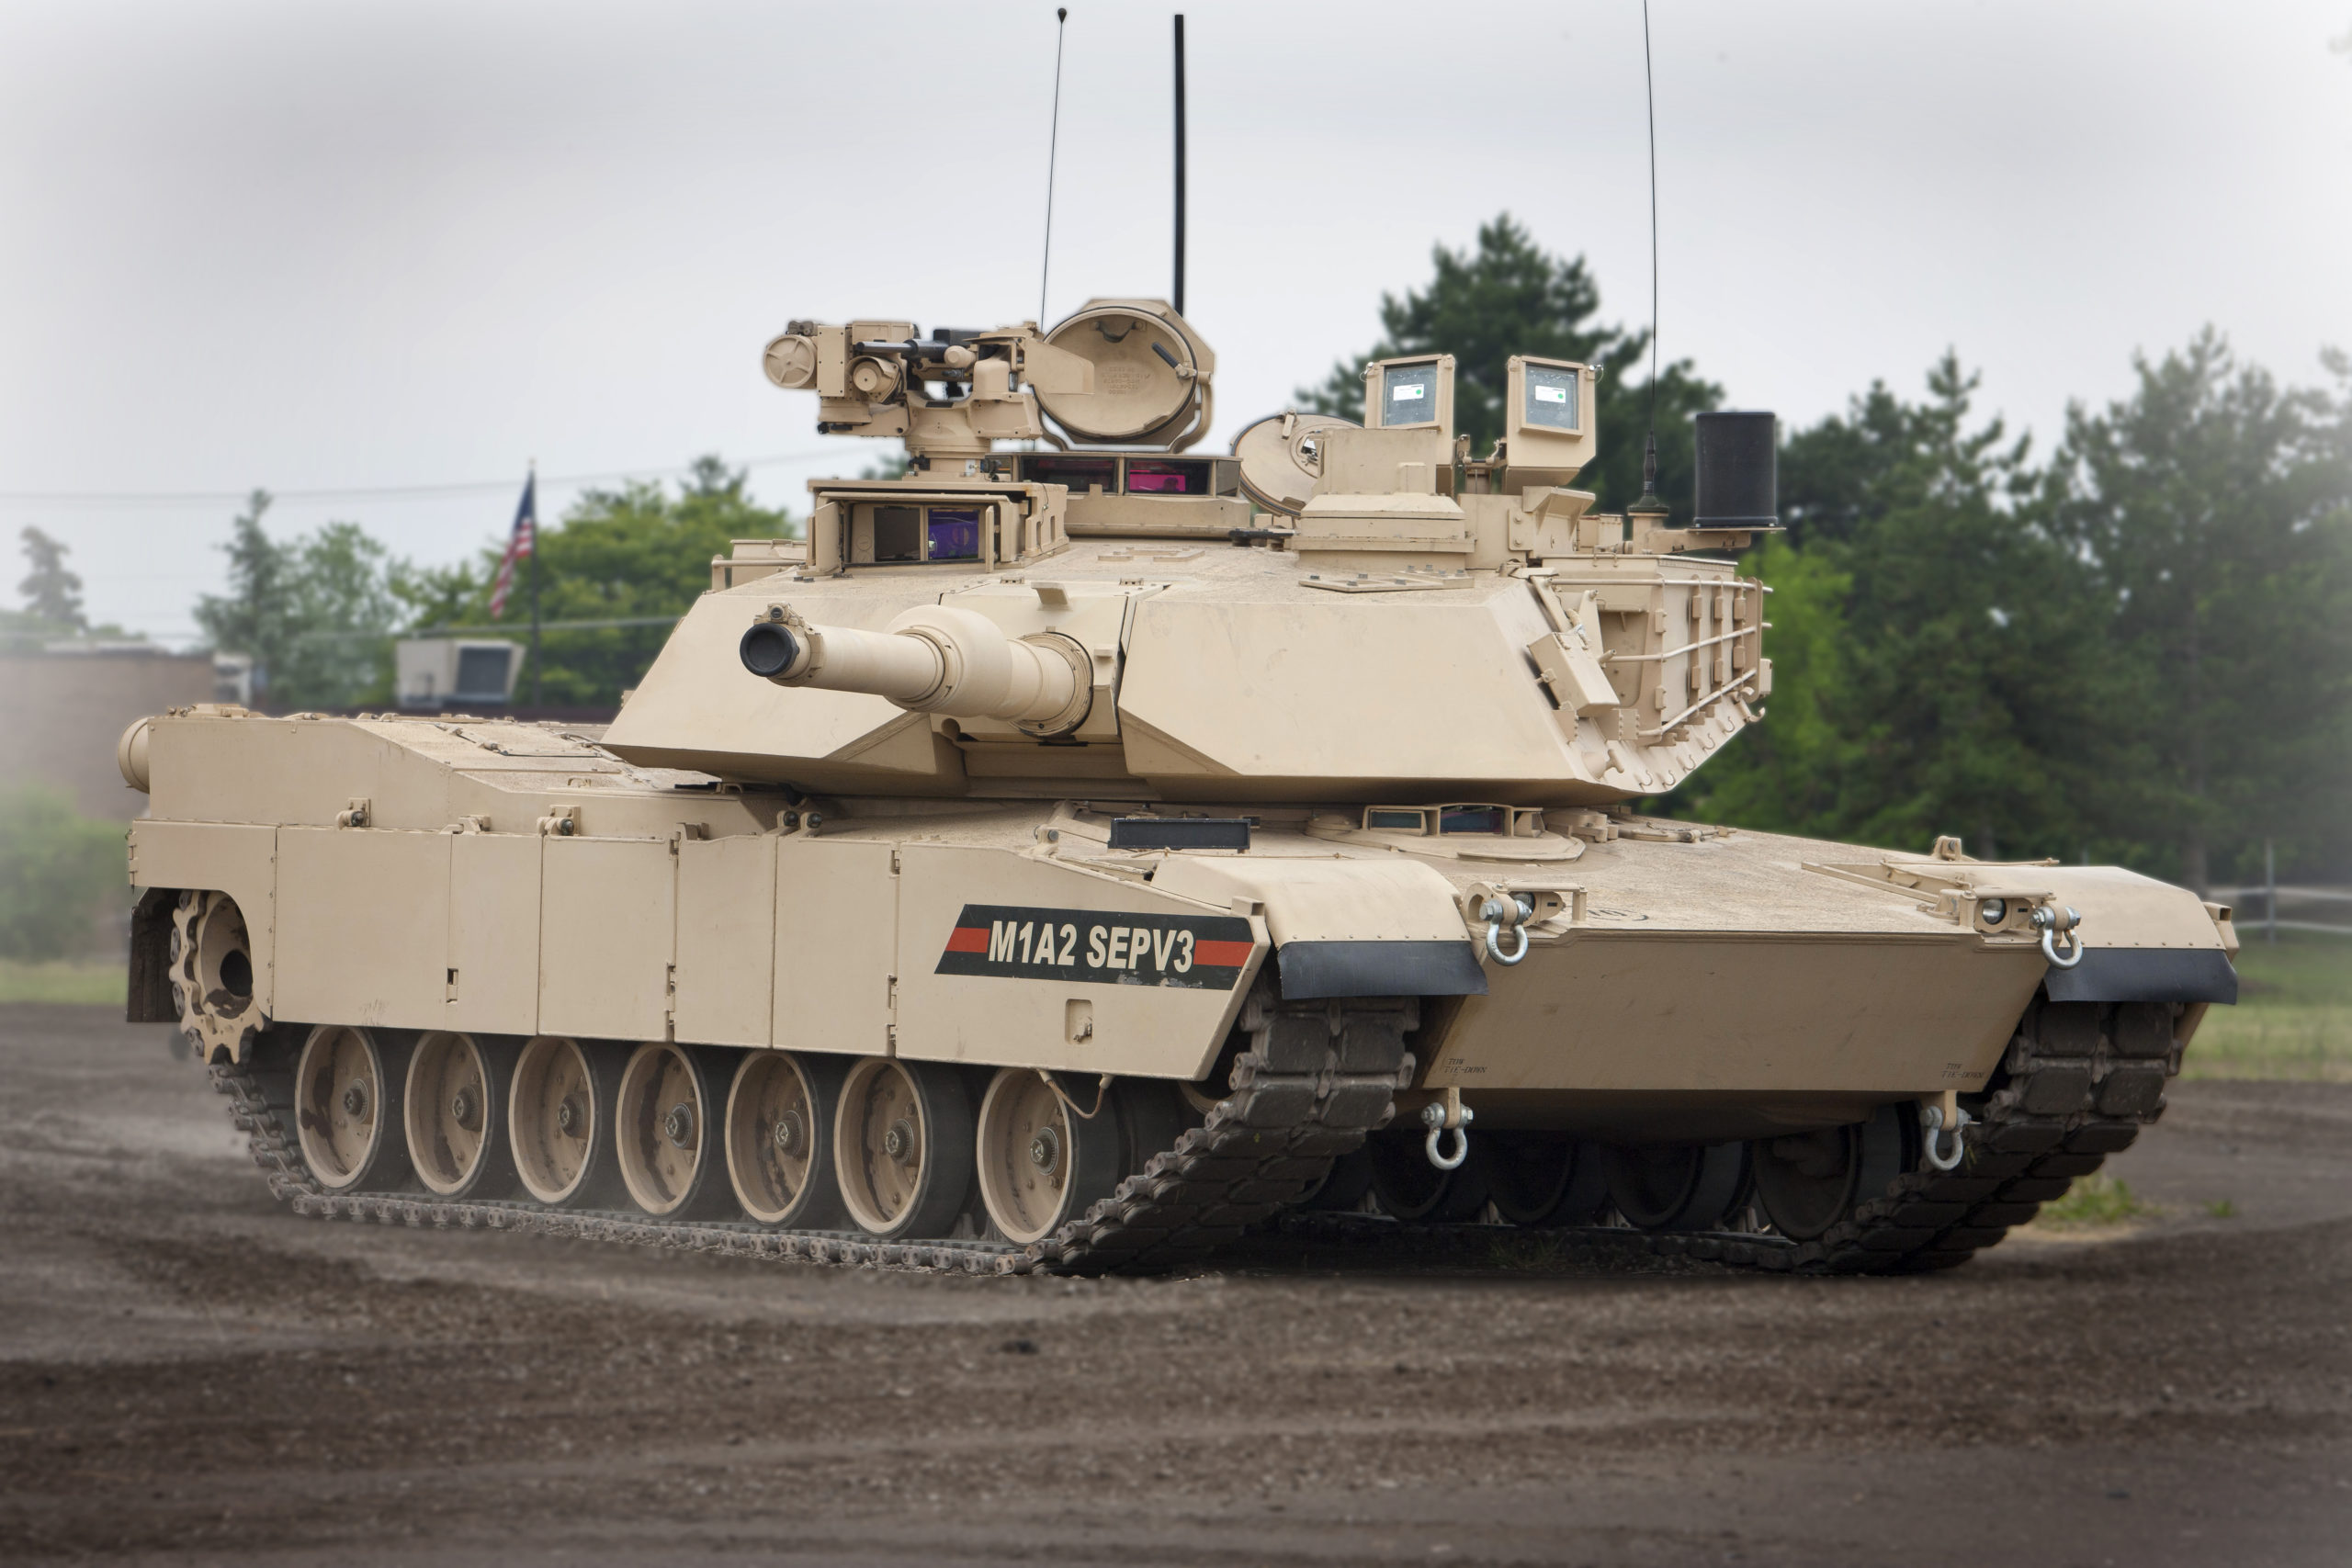 bandage bjærgning fremsætte Australian Army to Receive Advanced Abrams MBT - Asian Military Review